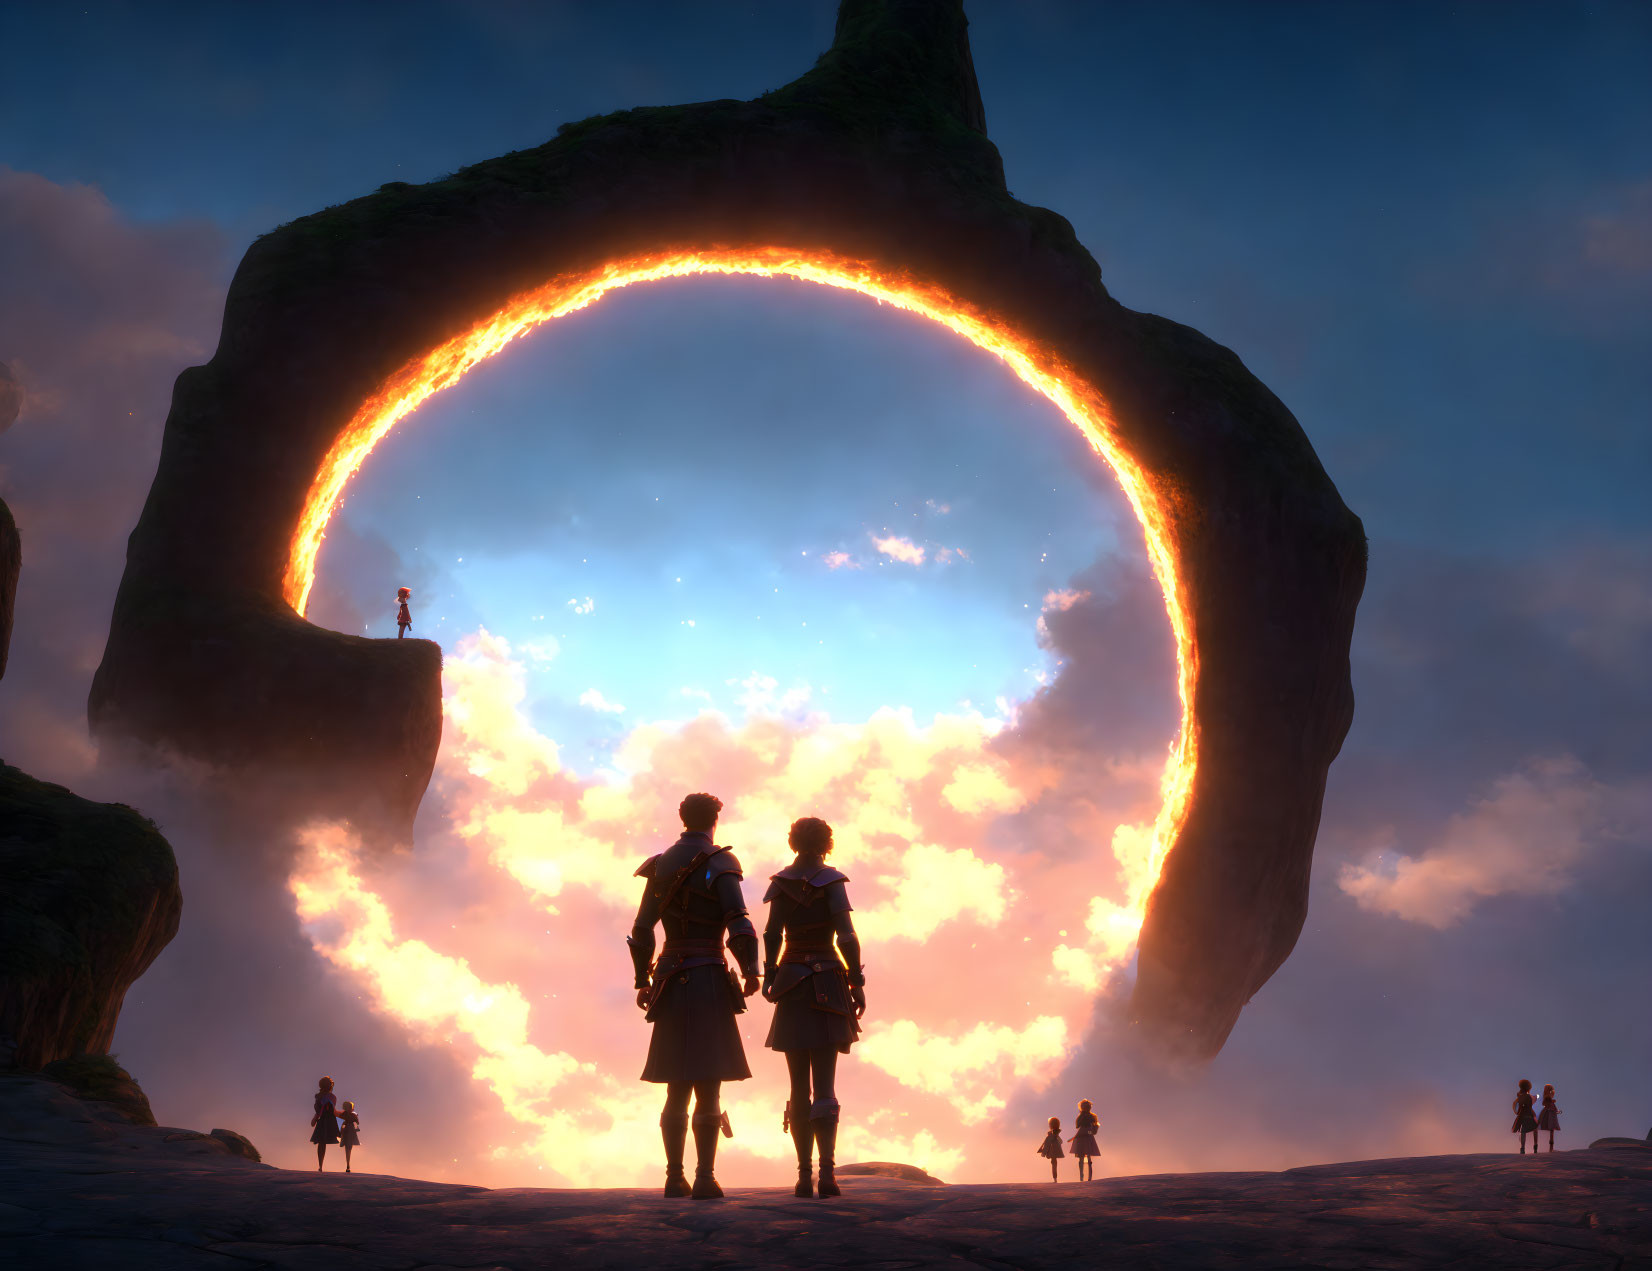 Silhouetted figures by flaming ring in rocky dusk landscape